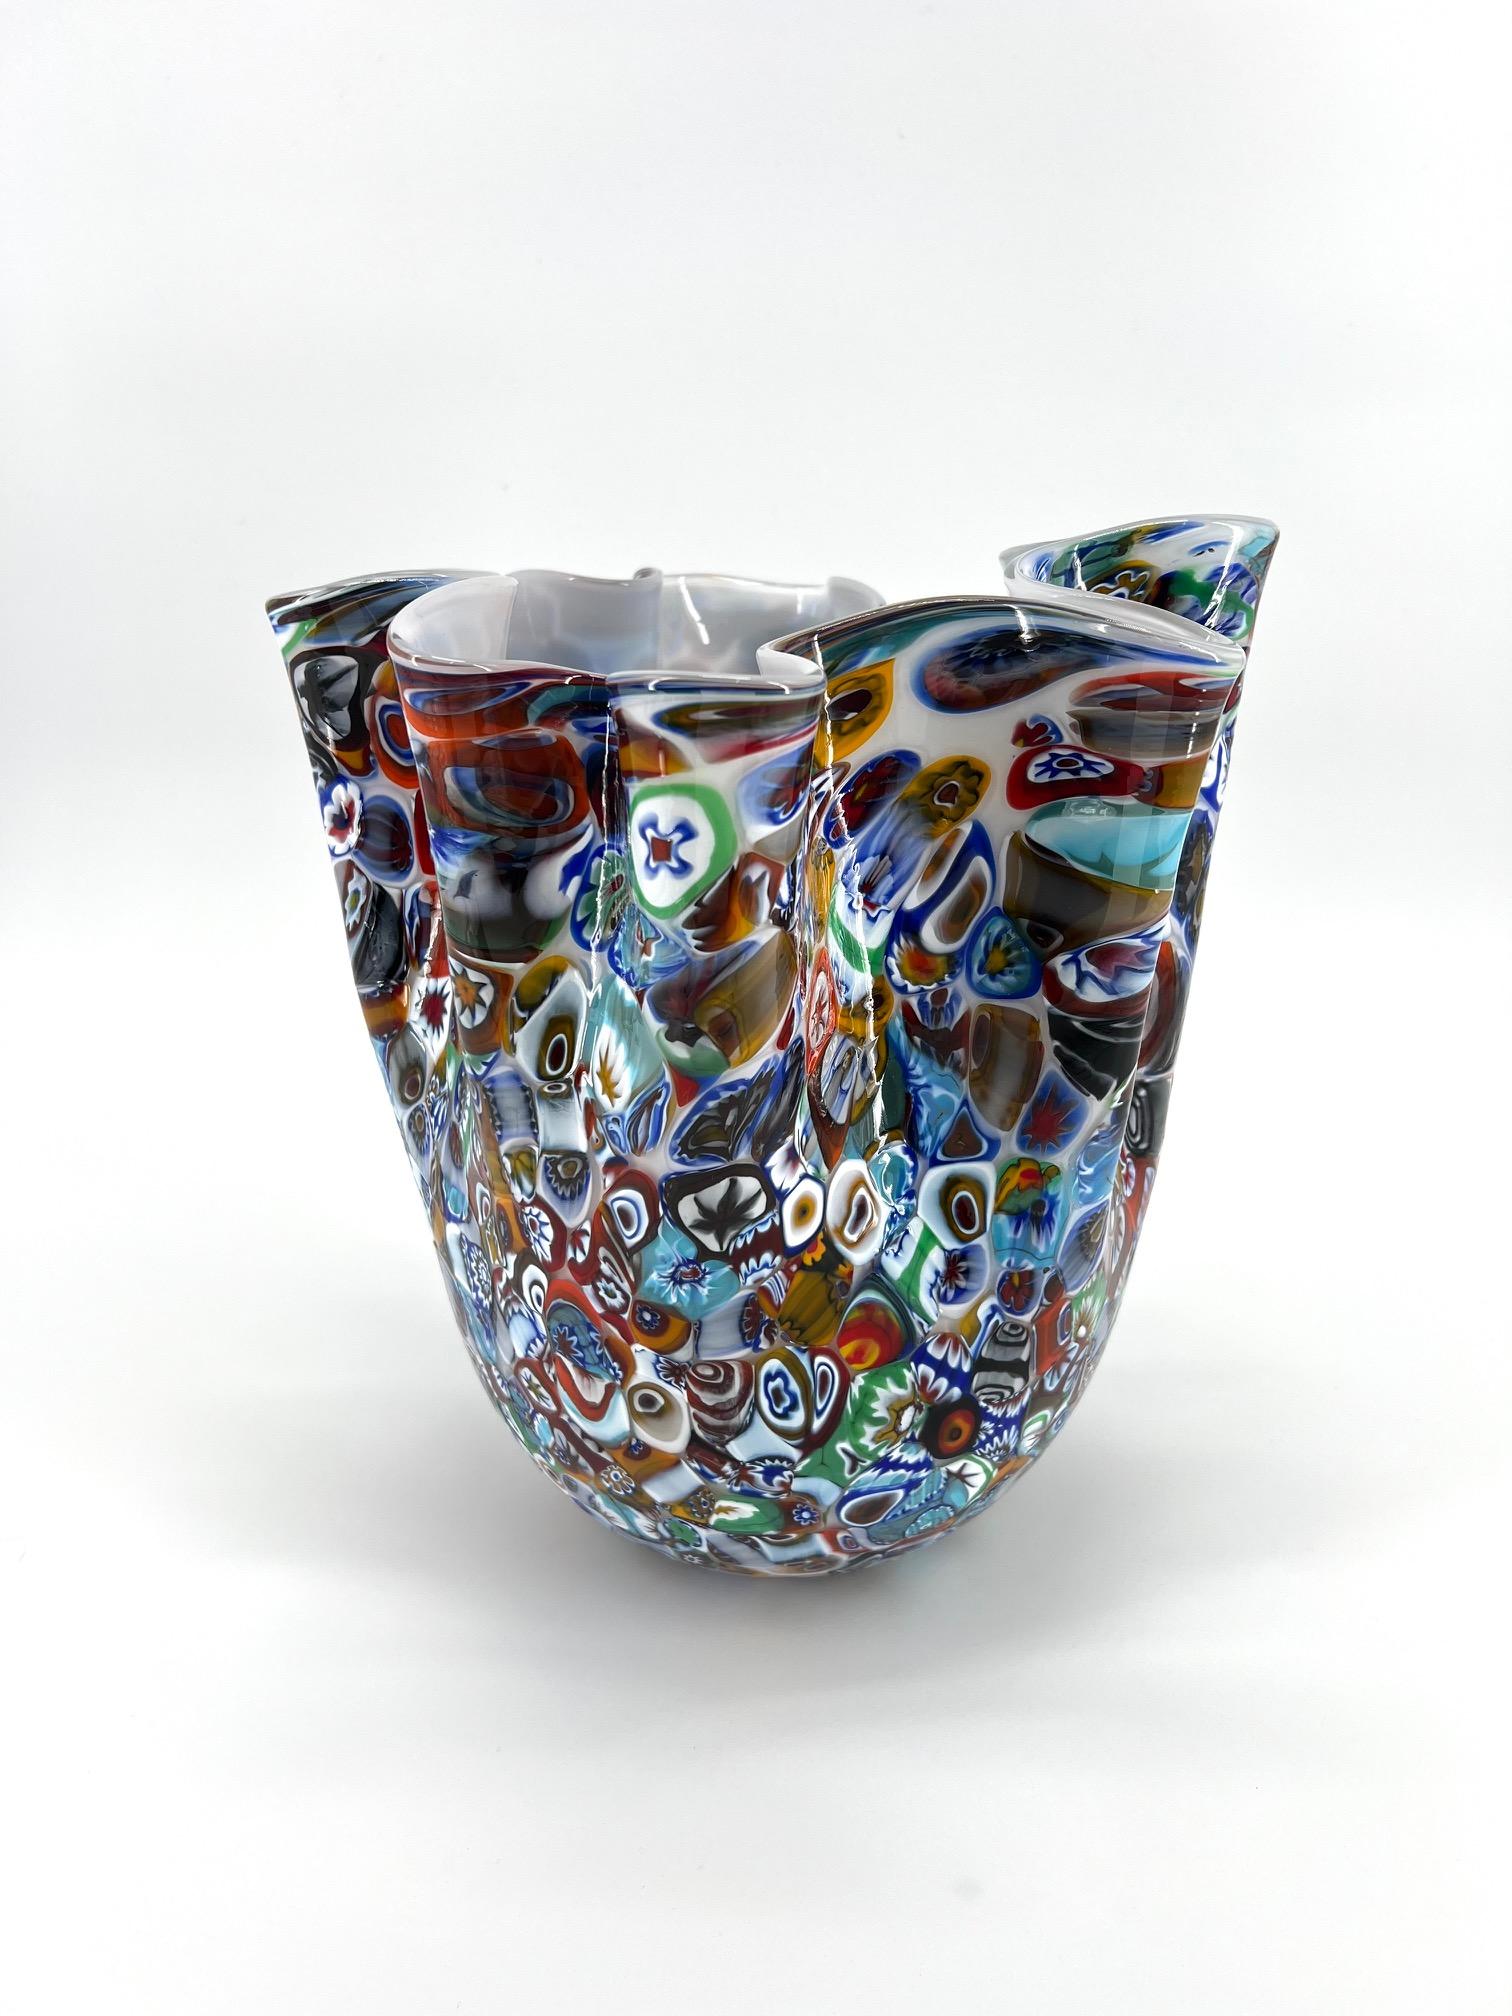 Our aim is the emotion through the creation of Murano glass artpieces.
 
This art-vase is made of inner 